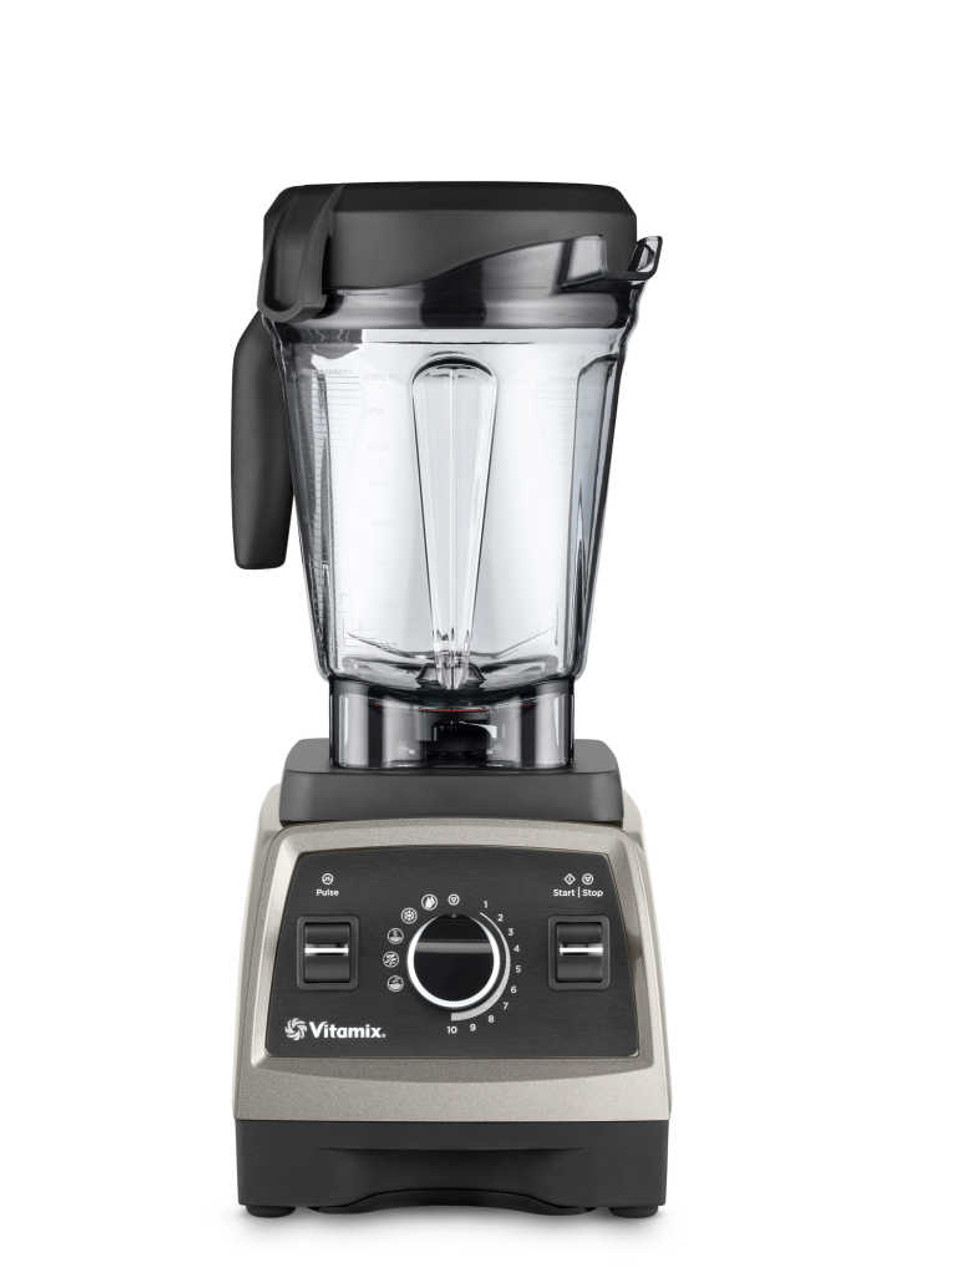 Would you pick the Vitamix Pro 750 or the Vitamix A3500, and why